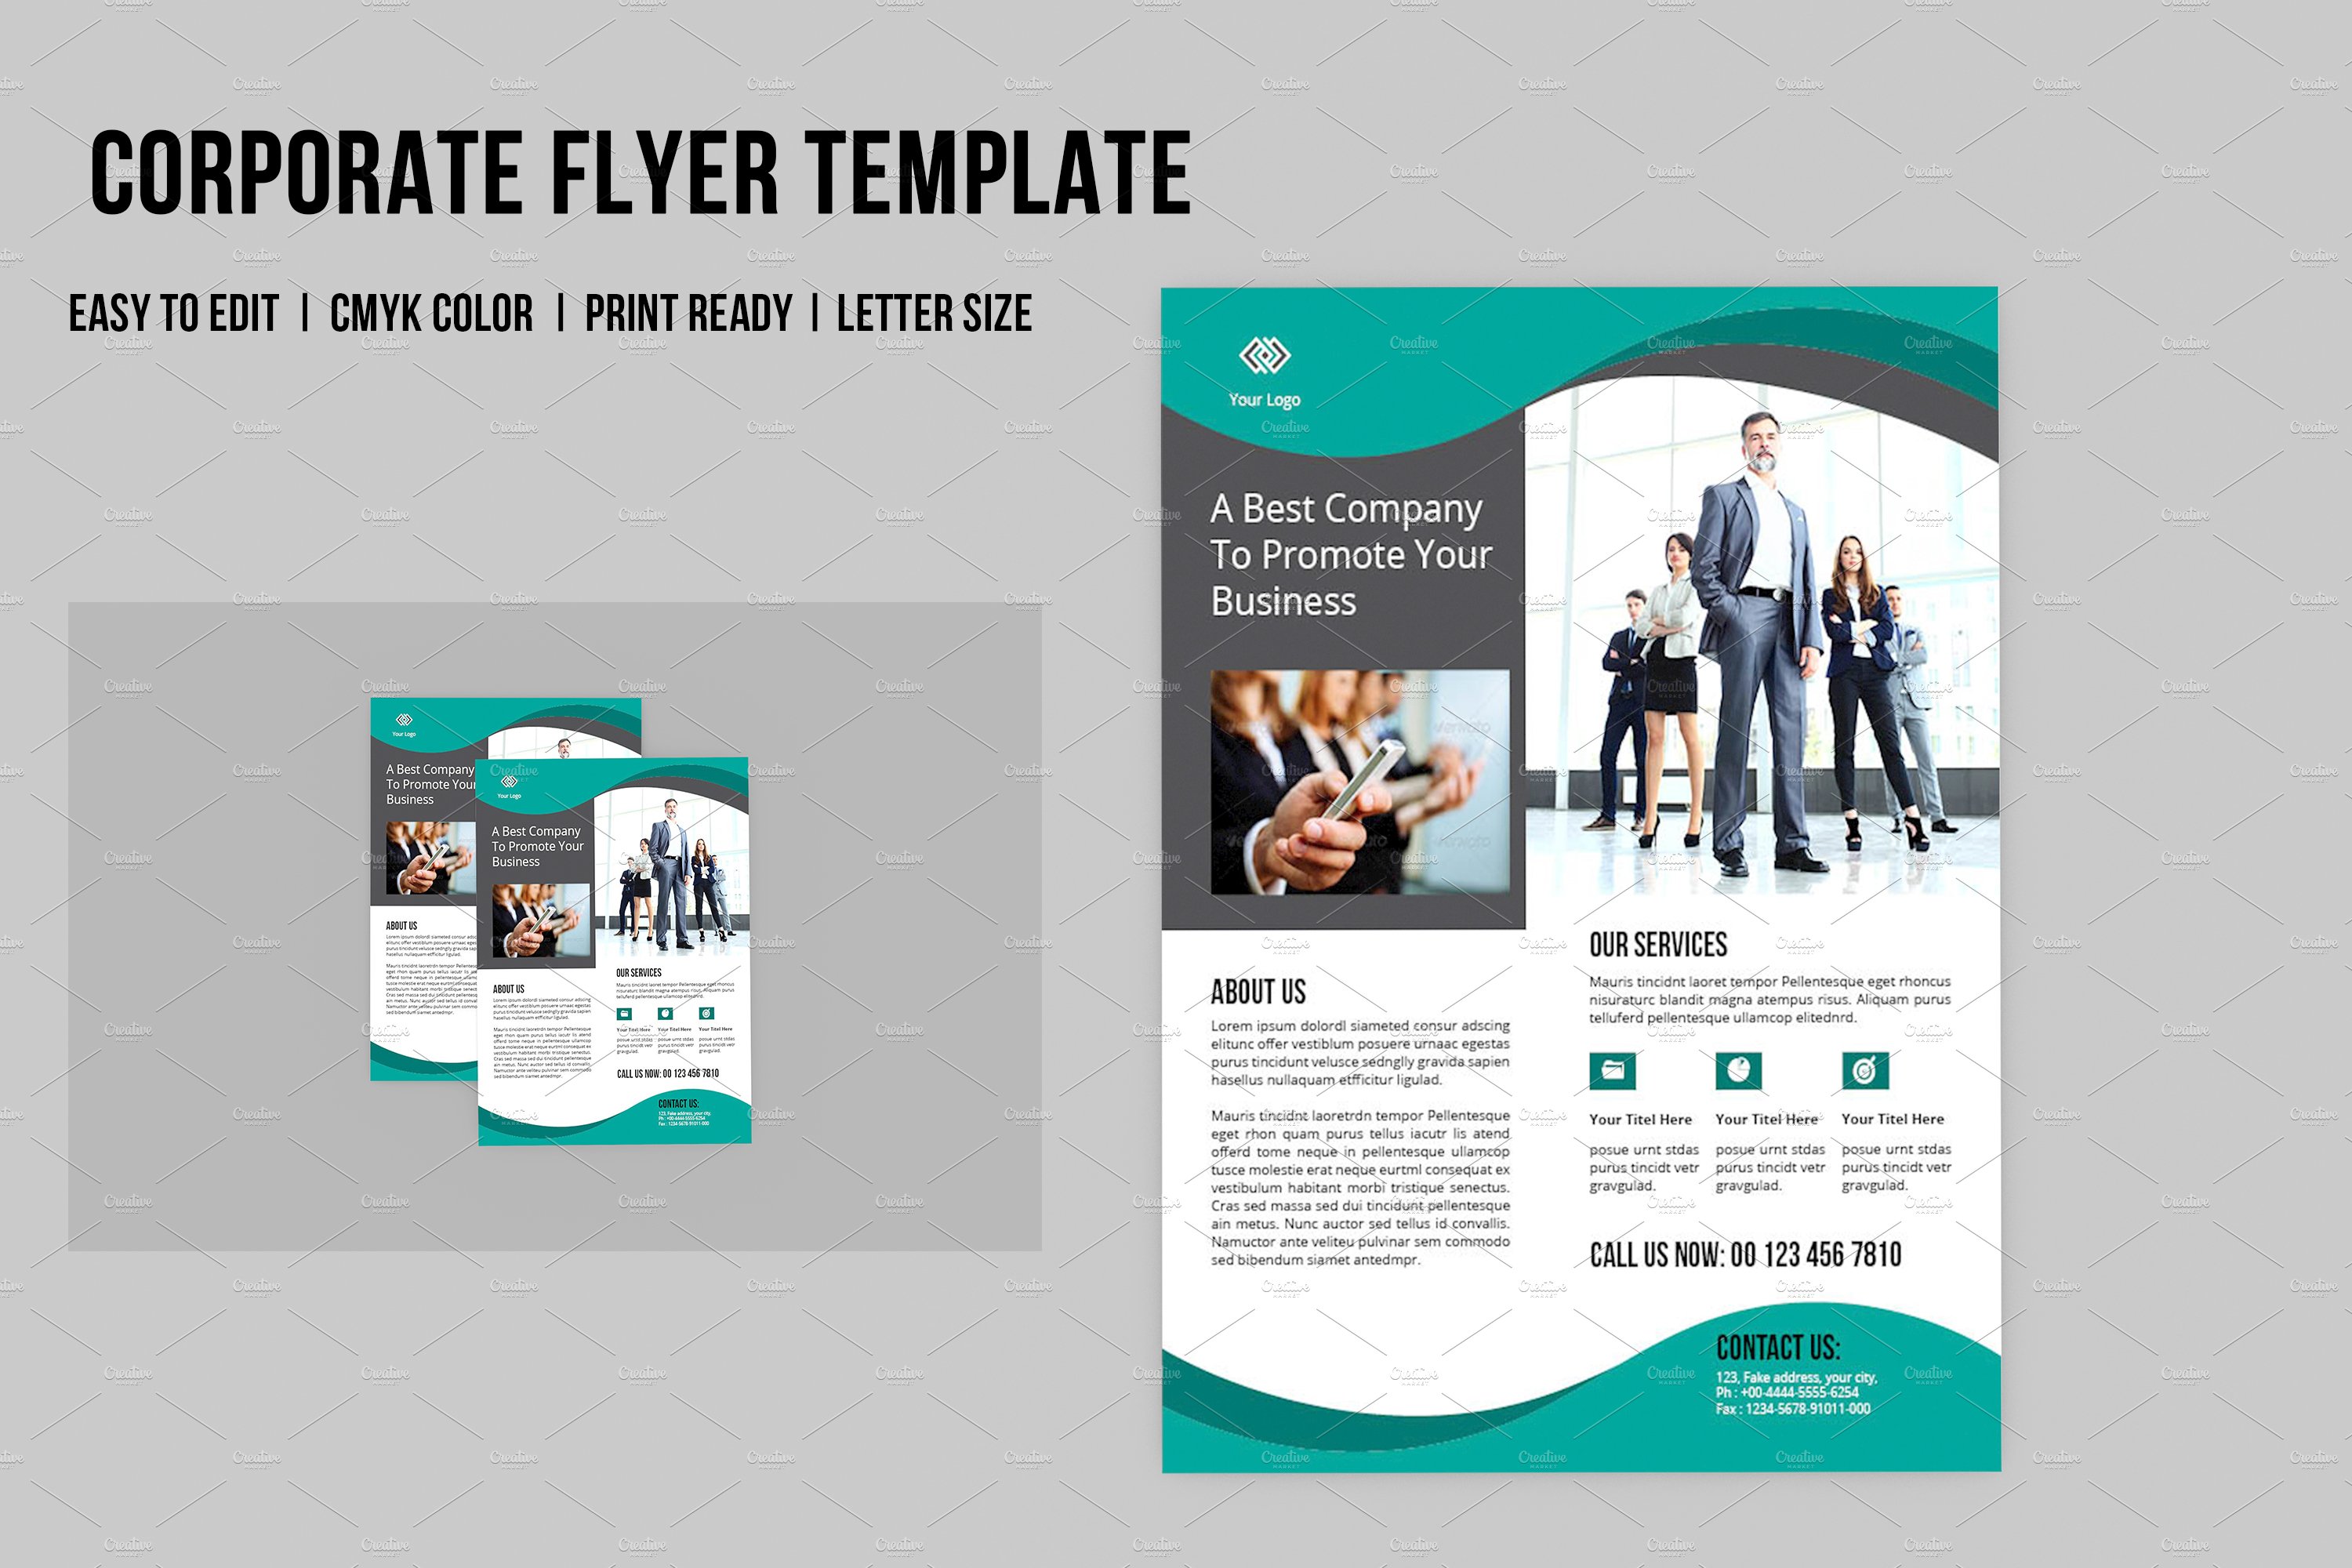 Free Indesign Flyer Templates newpals